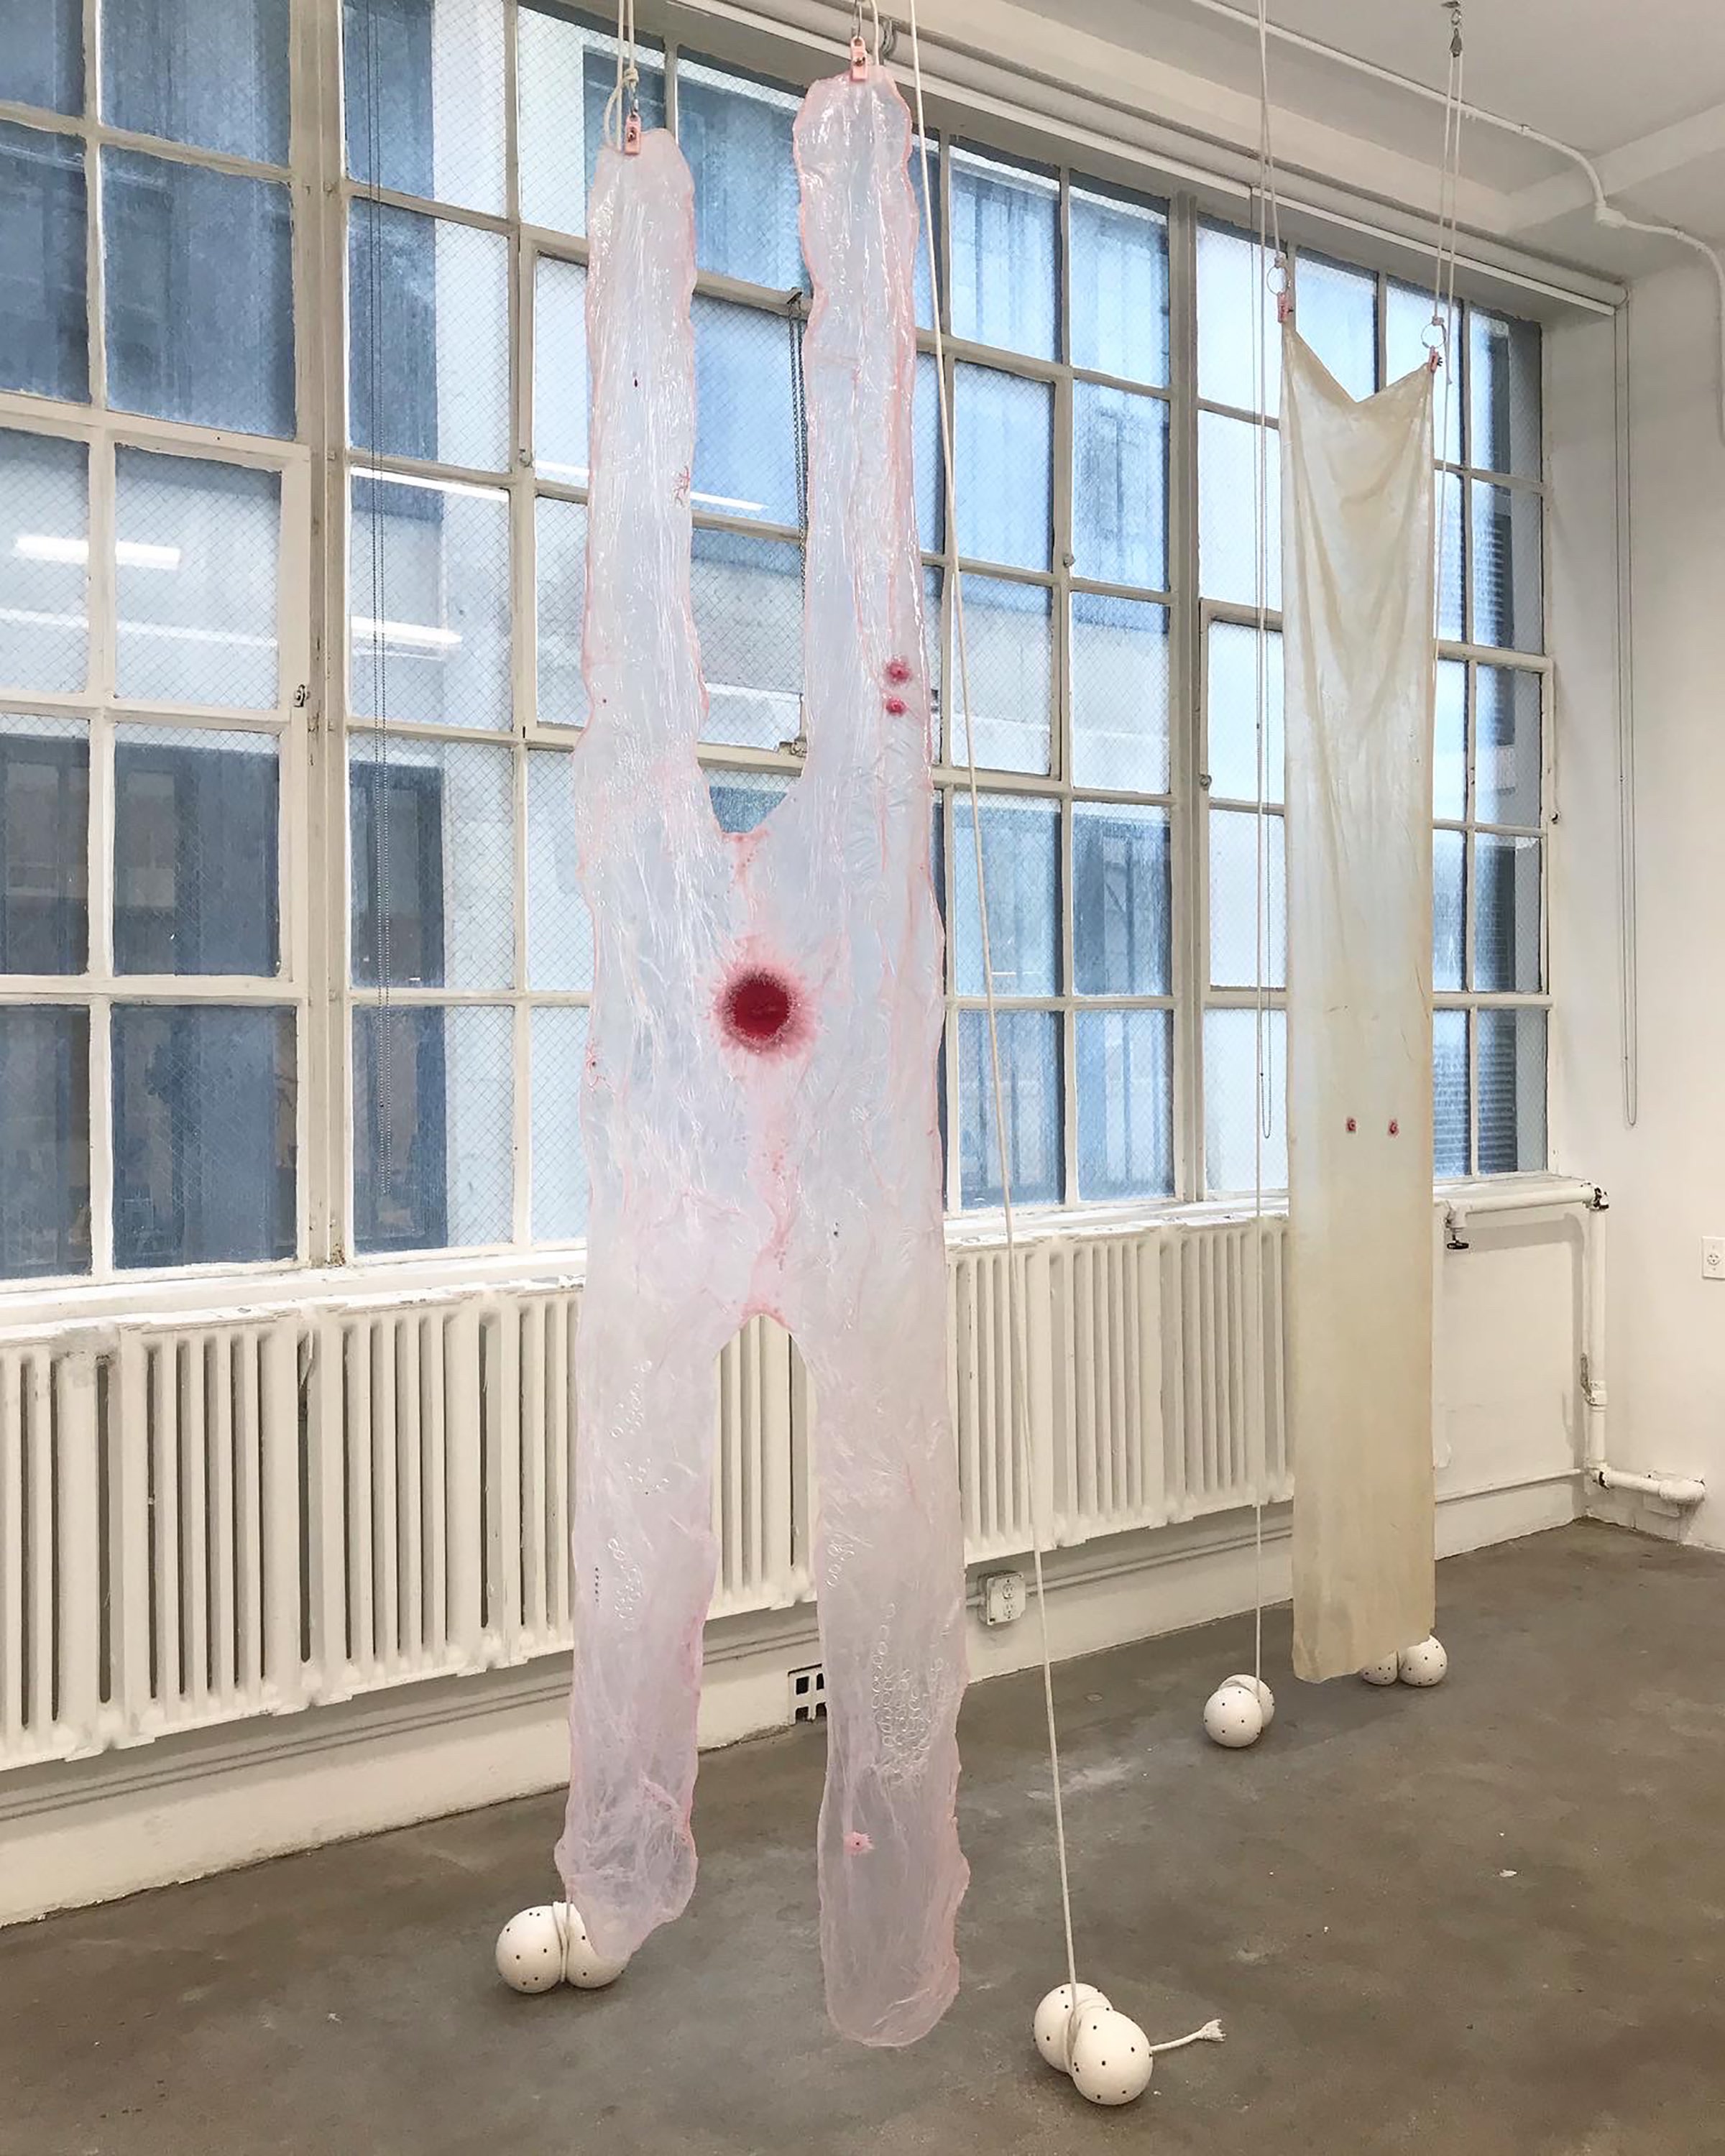  Karinne Smith  strawberry legs l-l , 2022&nbsp; collagen, silicone, plaster, resin, cantaloupe seeds,&nbsp;mosquitos, rope, flesh clamps 114 x 26 inches (290 x 66 cm)  Karinne Smith  strawberry legs l , 2022 collagen, silicone, plaster, glass beads,